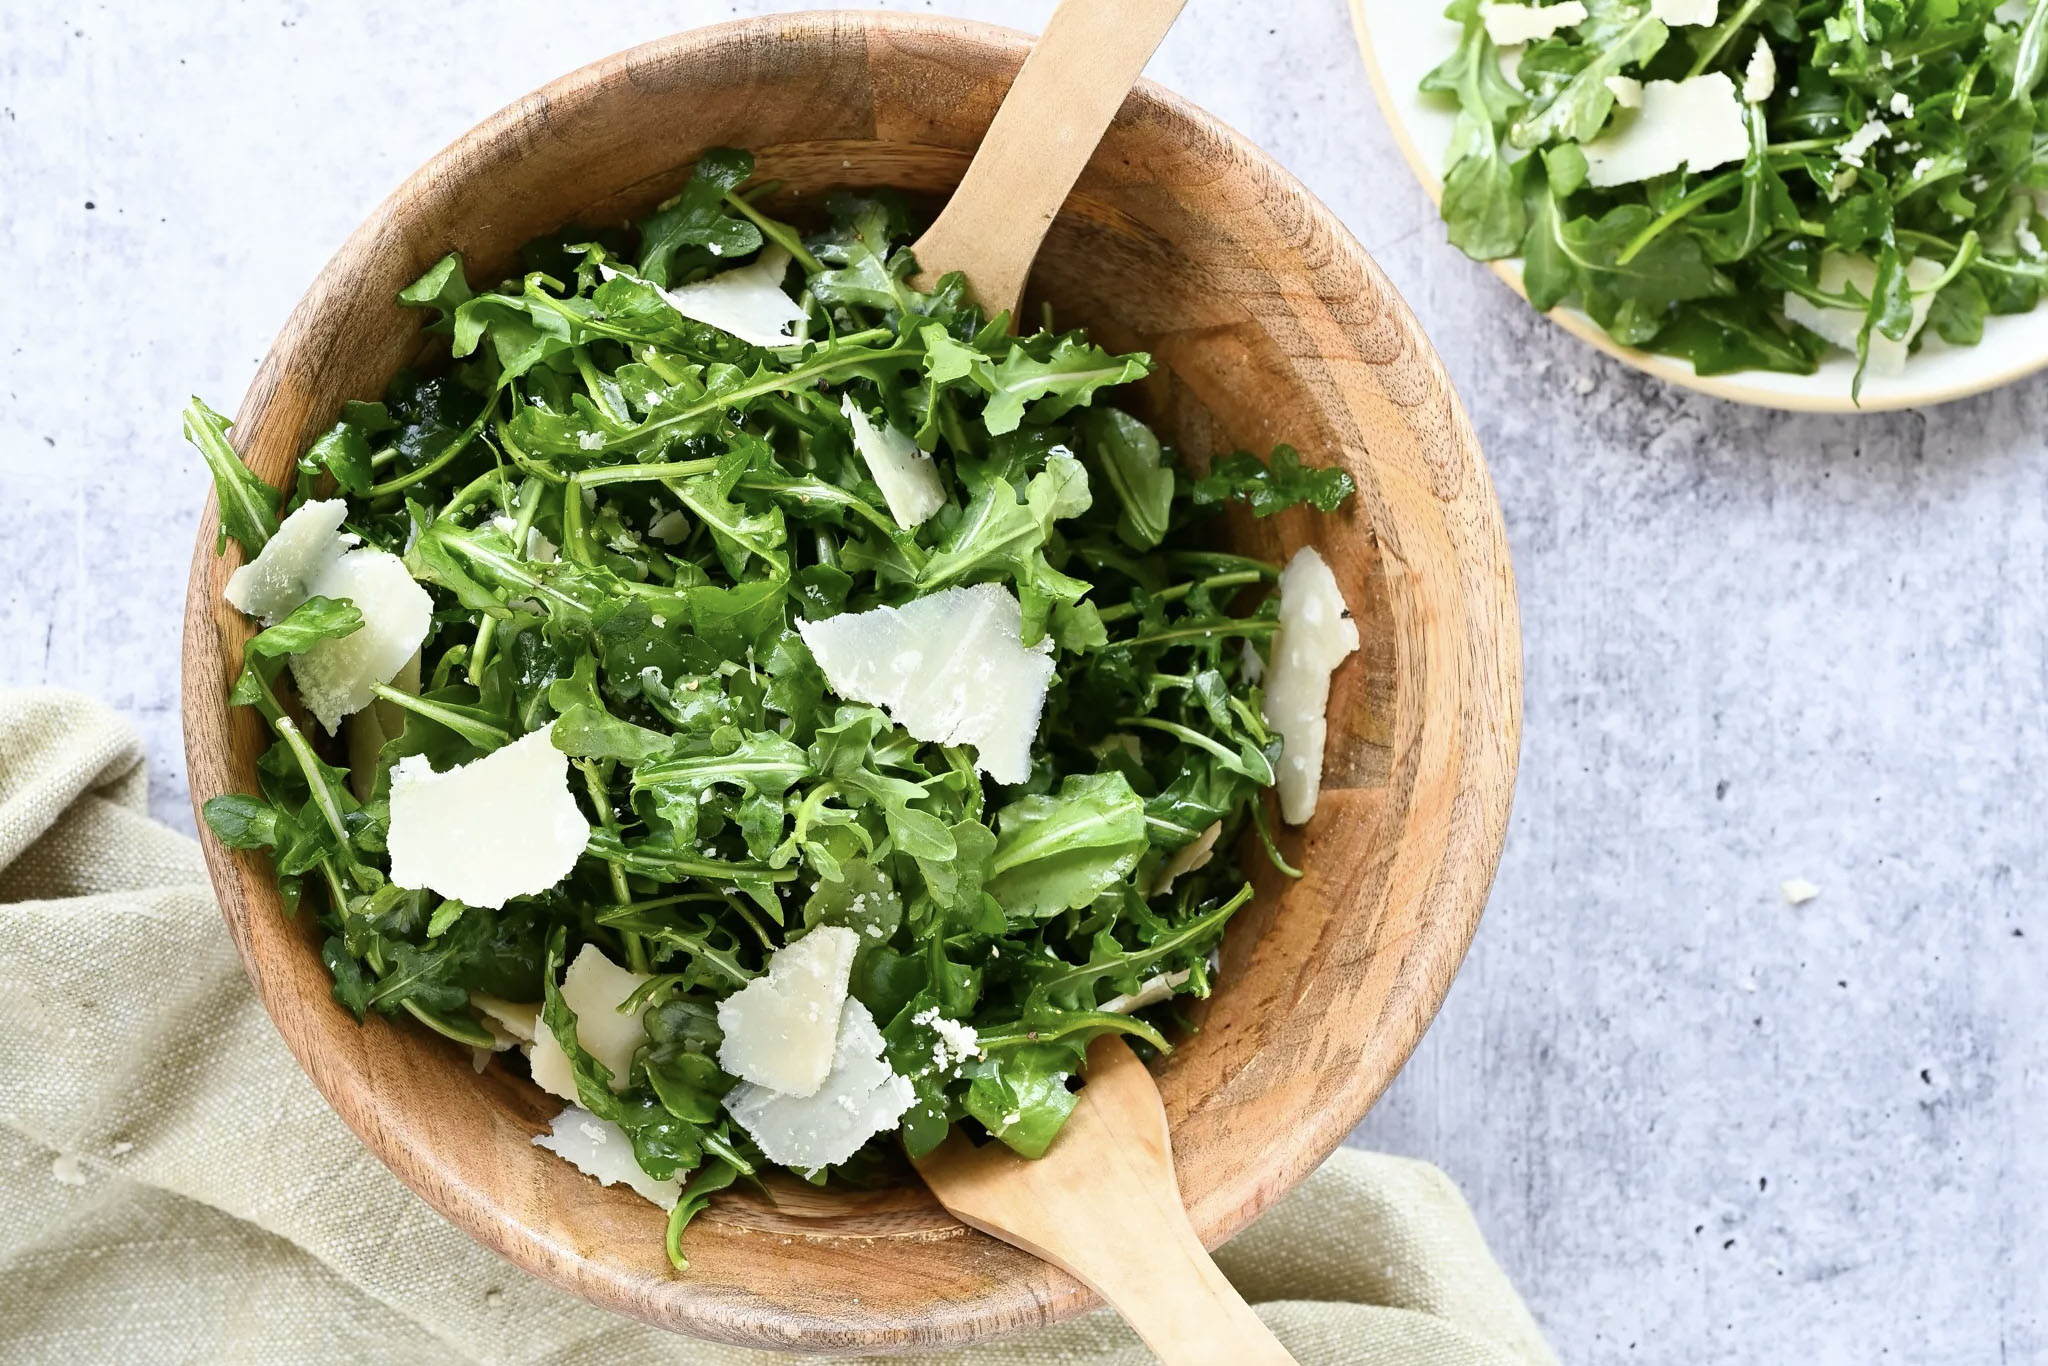 Salad with Lemon, Olive Oil, and Parmigiano Reggiano